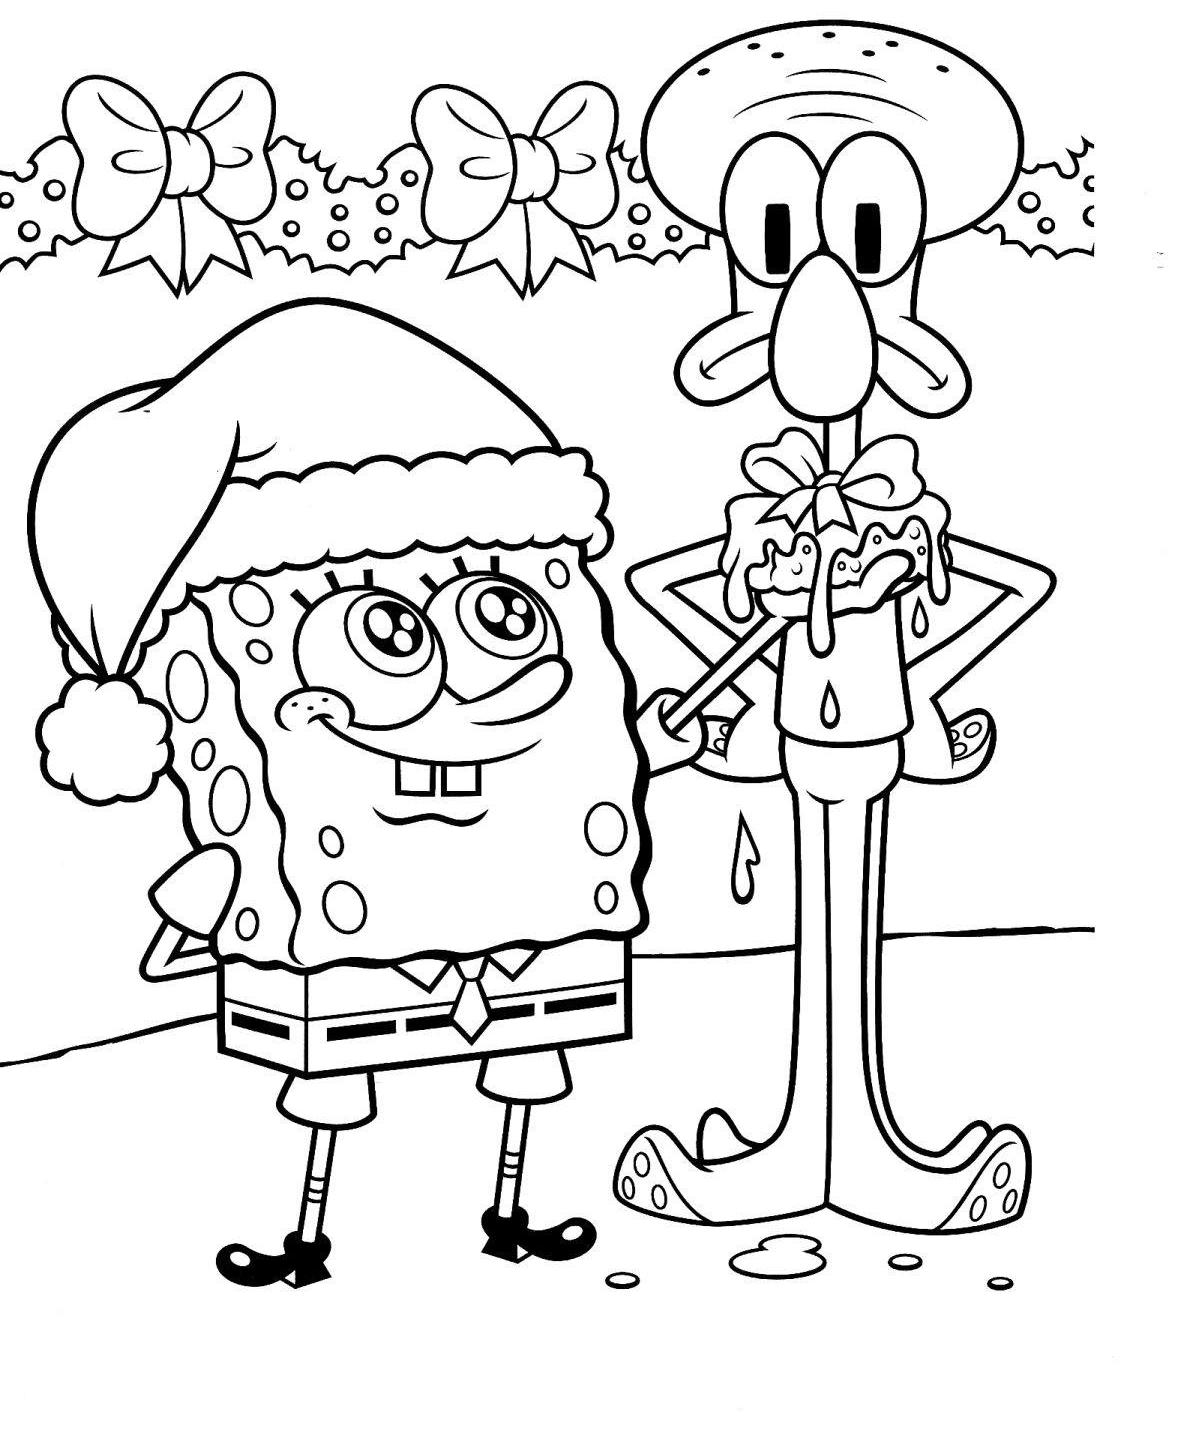 Spongebob Colouring Pages For Children Christmas